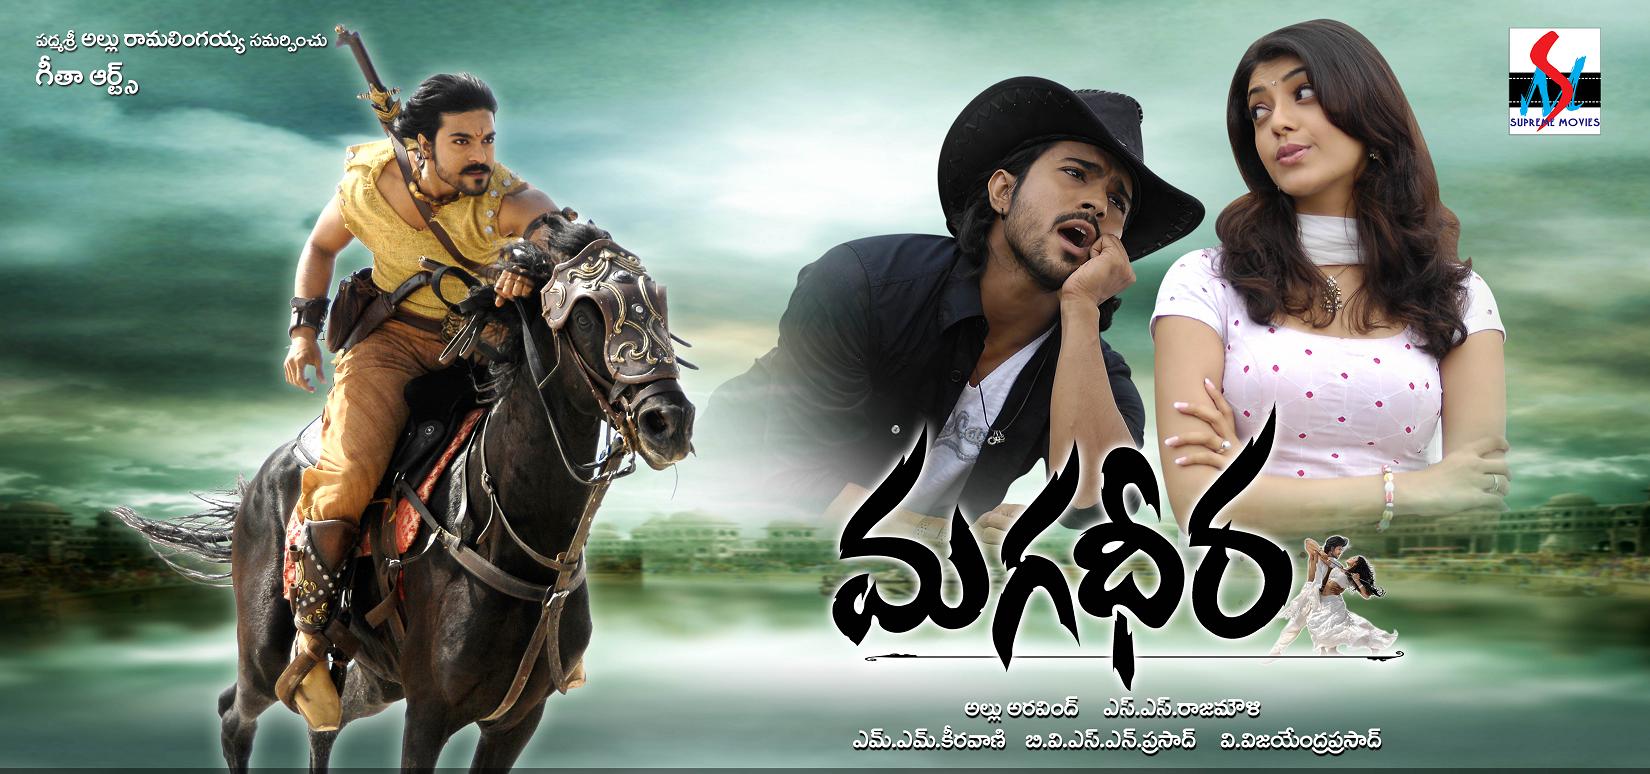 Magadheera Backgrounds, Compatible - PC, Mobile, Gadgets| 1650x774 px